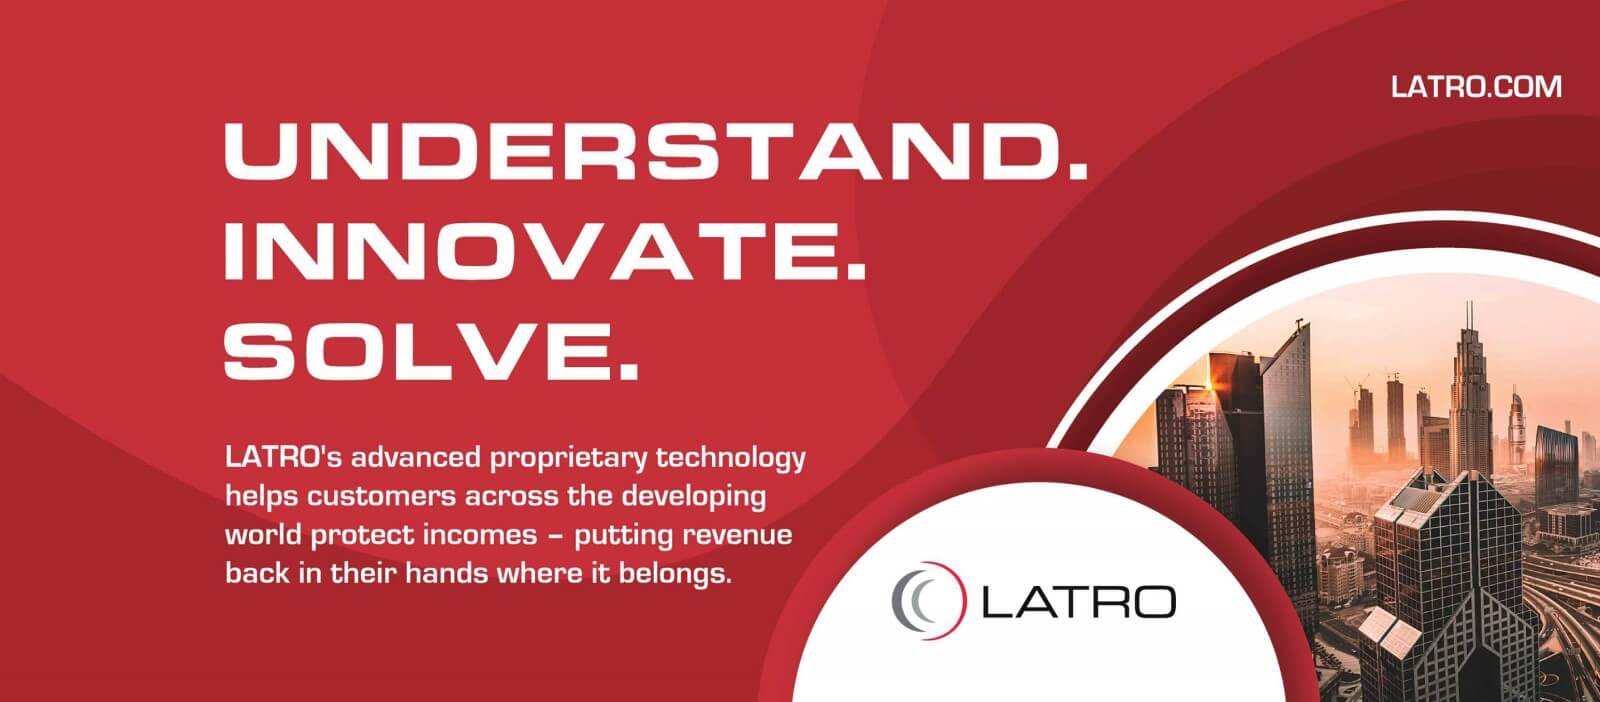 Latro - Understand, Innovate and Solve.